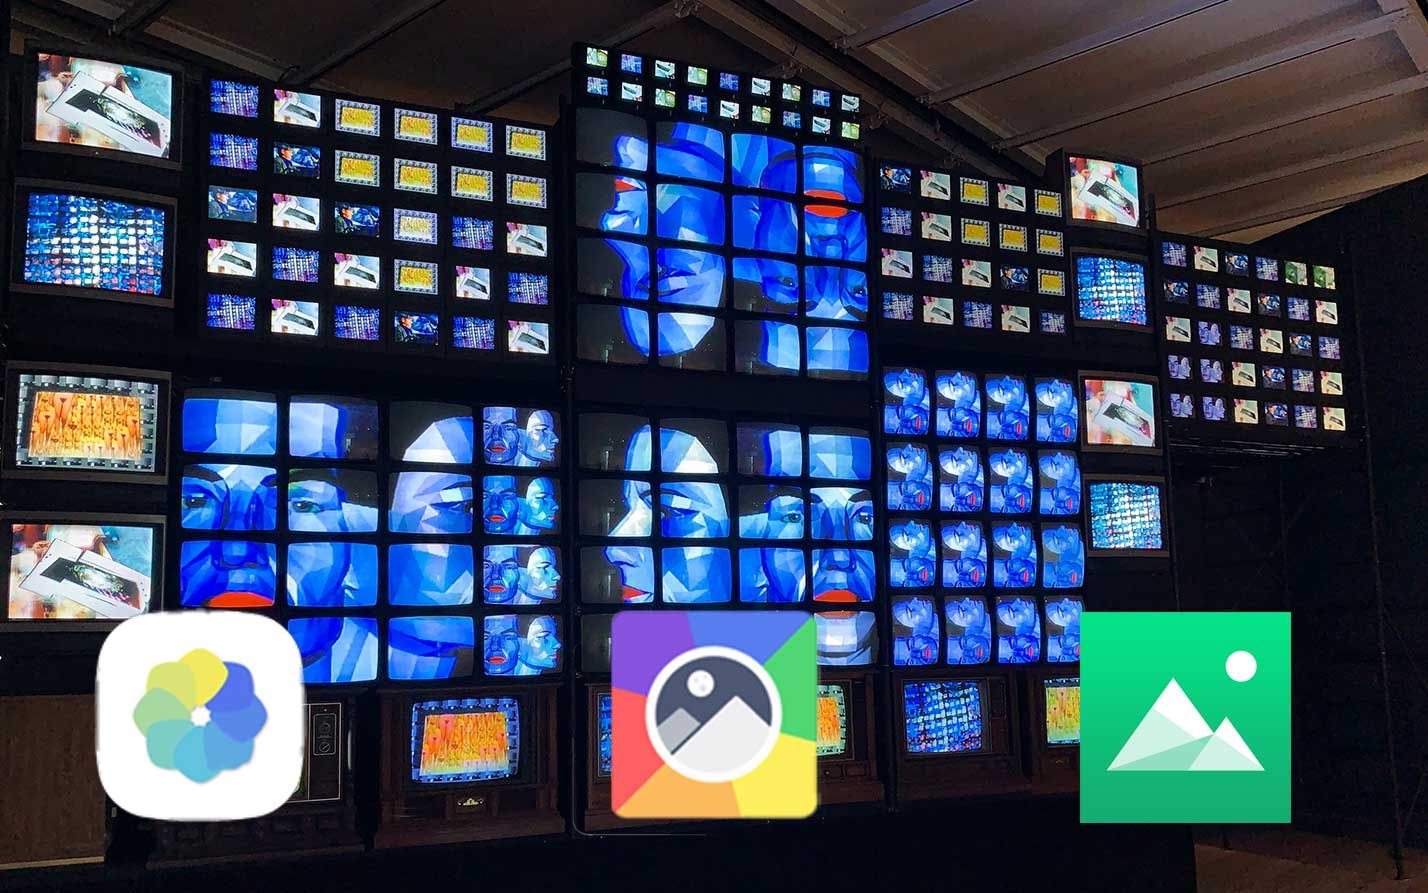 An art installation with dozens of televisions showing similar images sits behind icons for three app icons.